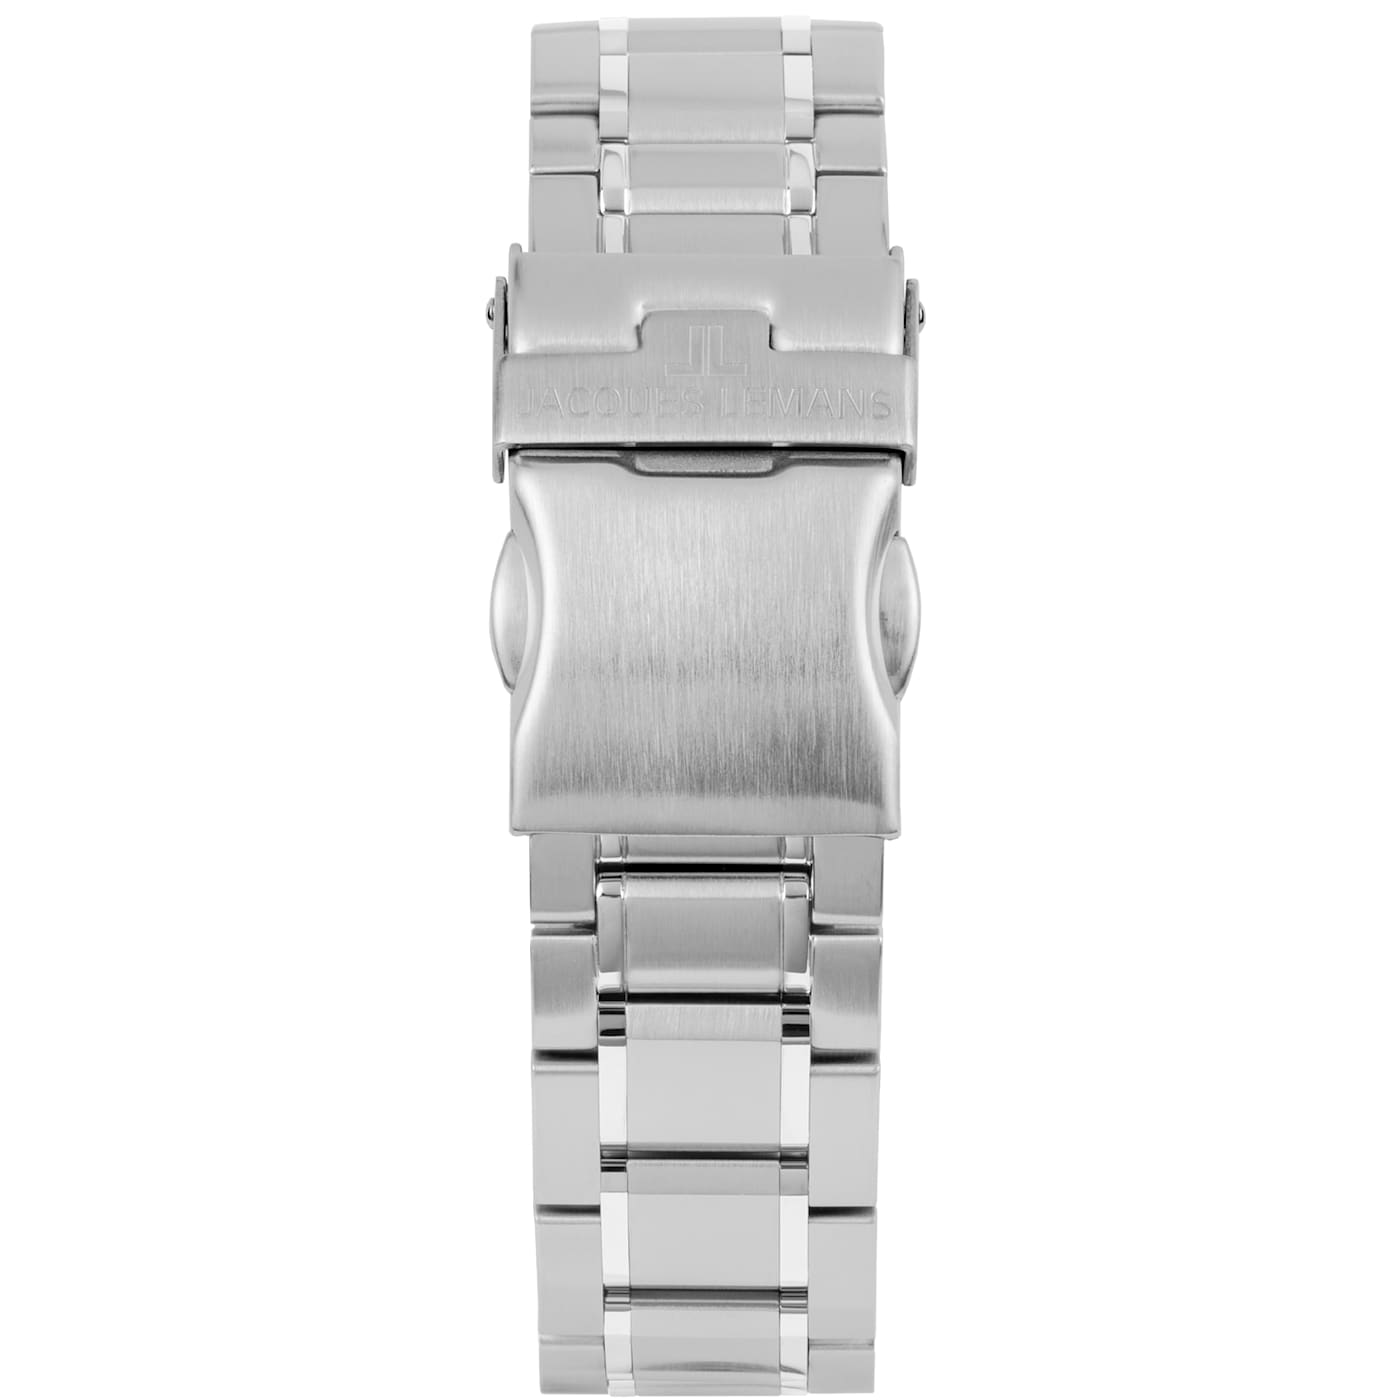 JACQUES LEMANS Hybromatic Men's Watch with Solid Stainless Steel Strap 1- 2109 - 18M20A